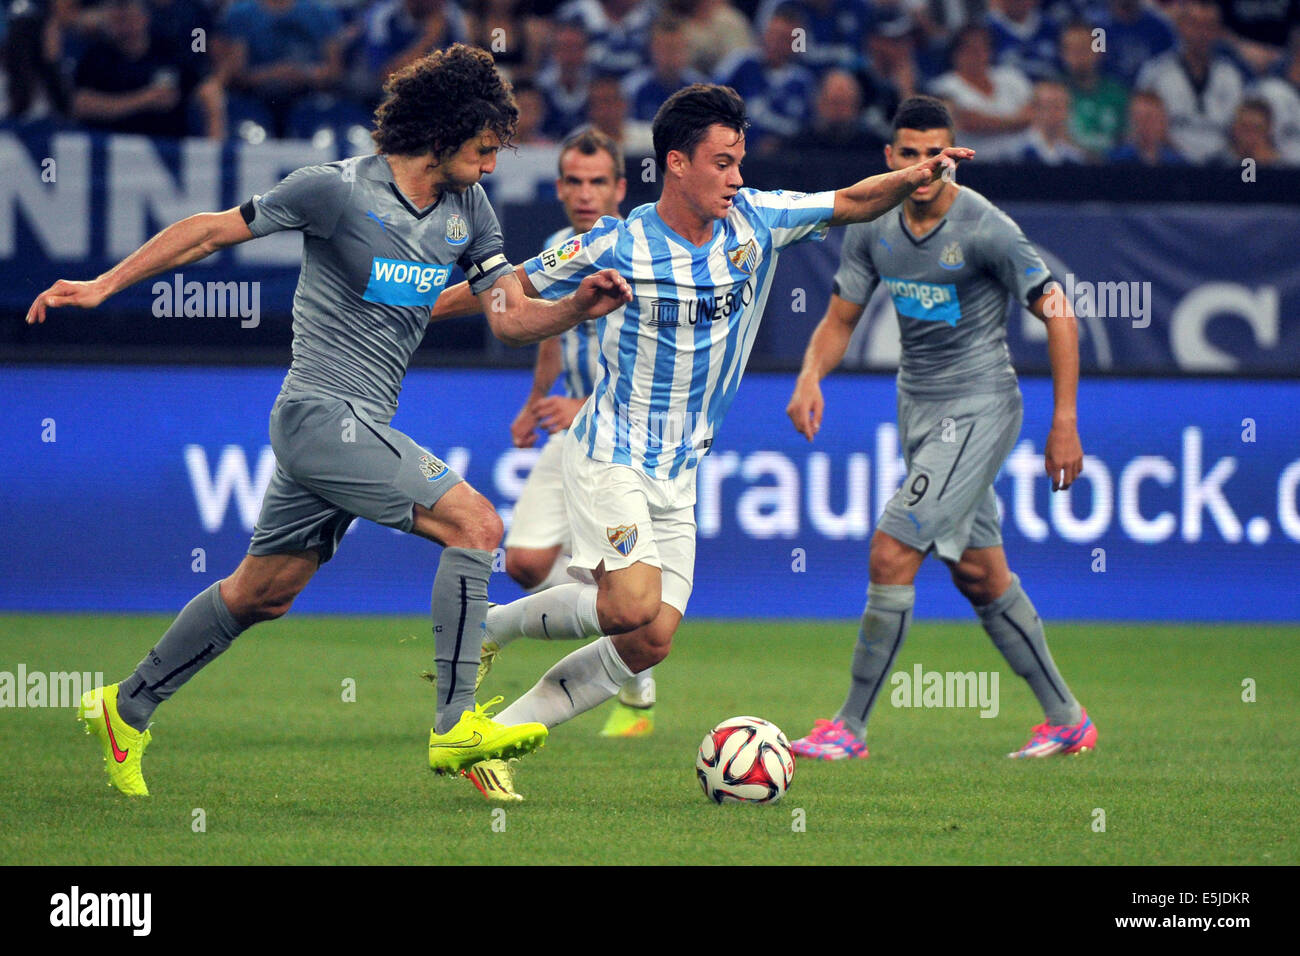 Gelsenkirchen, Germany. 02nd Aug, 2014. Malaga's Juanmi (C) and Newcastle's Fabricio Coloccini in action during the Schalke Cup match between FC Malaga and Newcastle United at Veltins Arena in Gelsenkirchen, Germany, 02 August 2014. Photo: MATTHIAS BALK/dpa/Alamy Live News Stock Photo